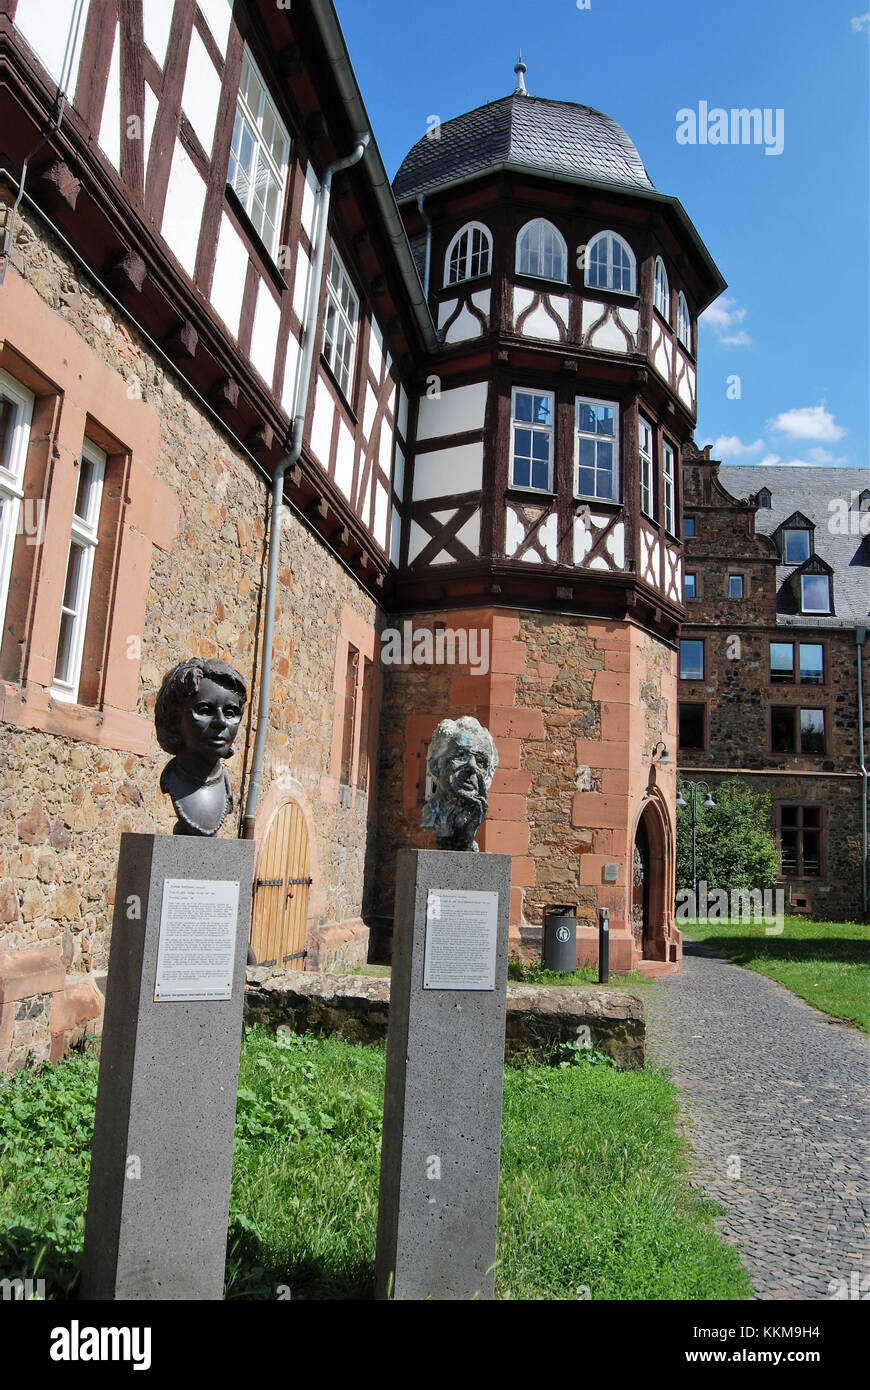 Busts in front of the new castle in Giessen showing the former professors Horst-Eberhardt Richter (on the right) and Helge-Agnes Pross (left) of the Gießen Justus Liebig university Stock Photo